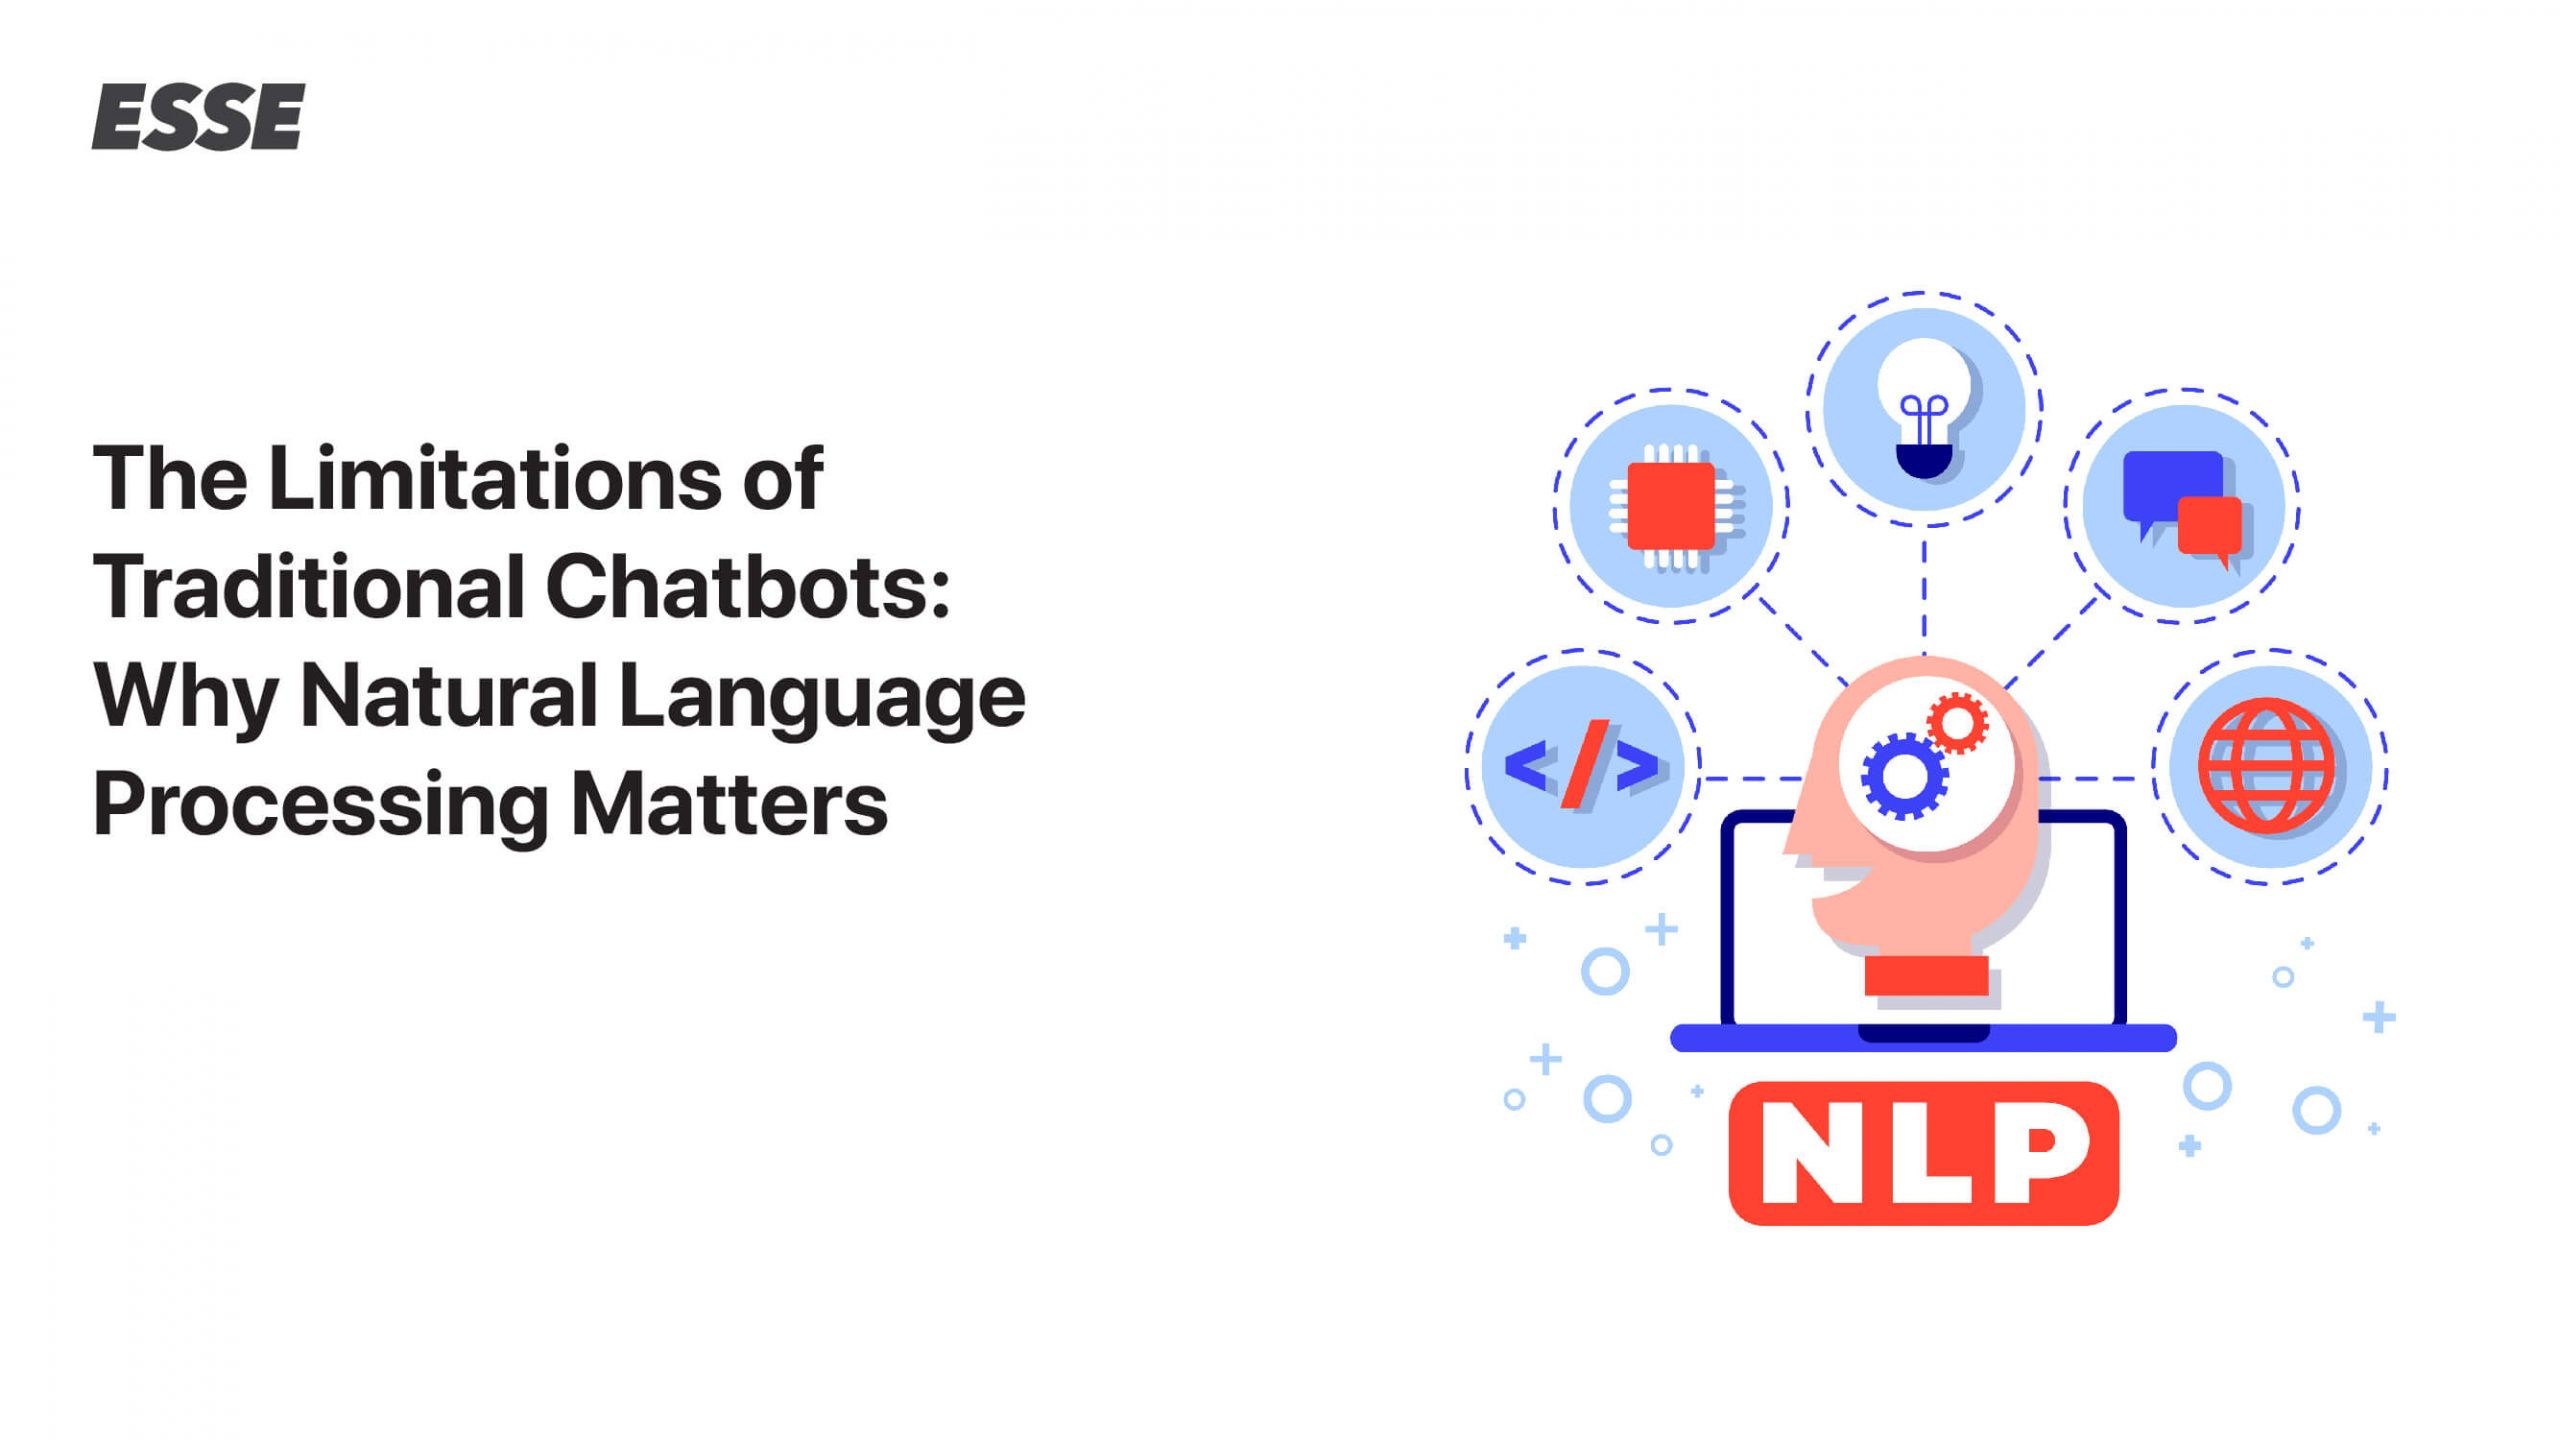 The Limitations of Traditional Chatbots: Why Natural Language Processing Matters